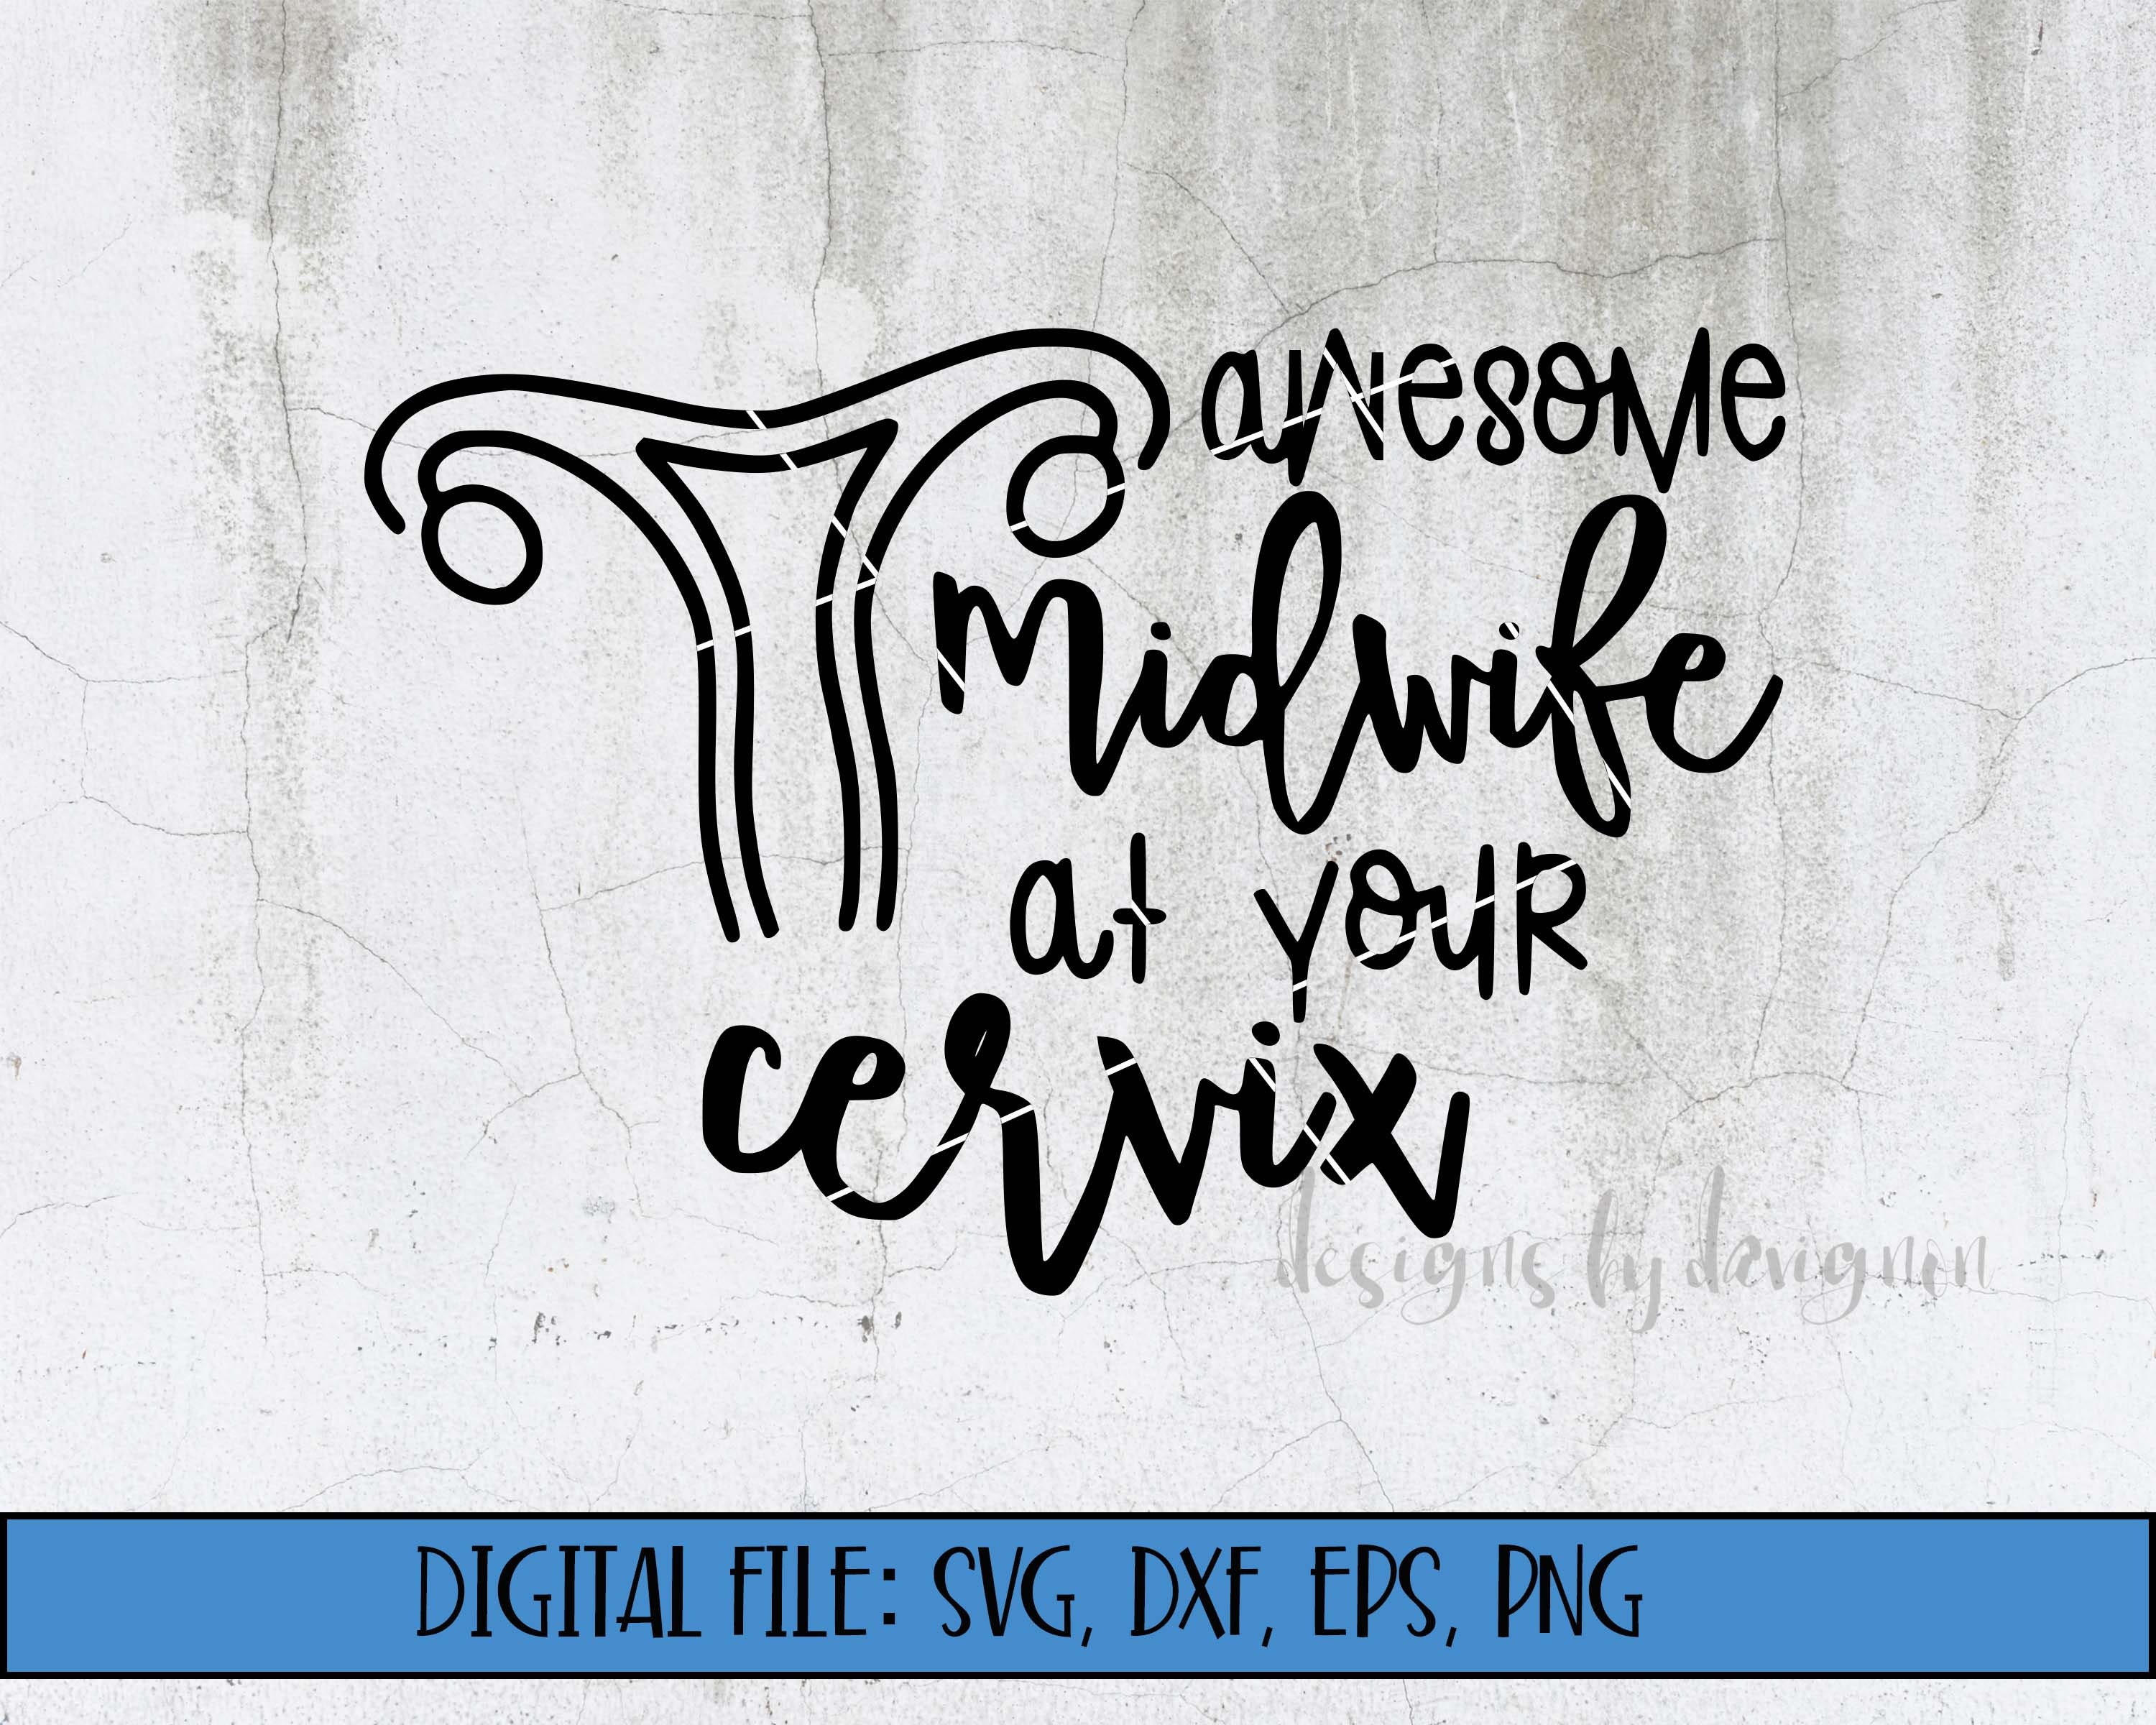 Digital File Awesome Midwife at Your Cervix Cut Files photo